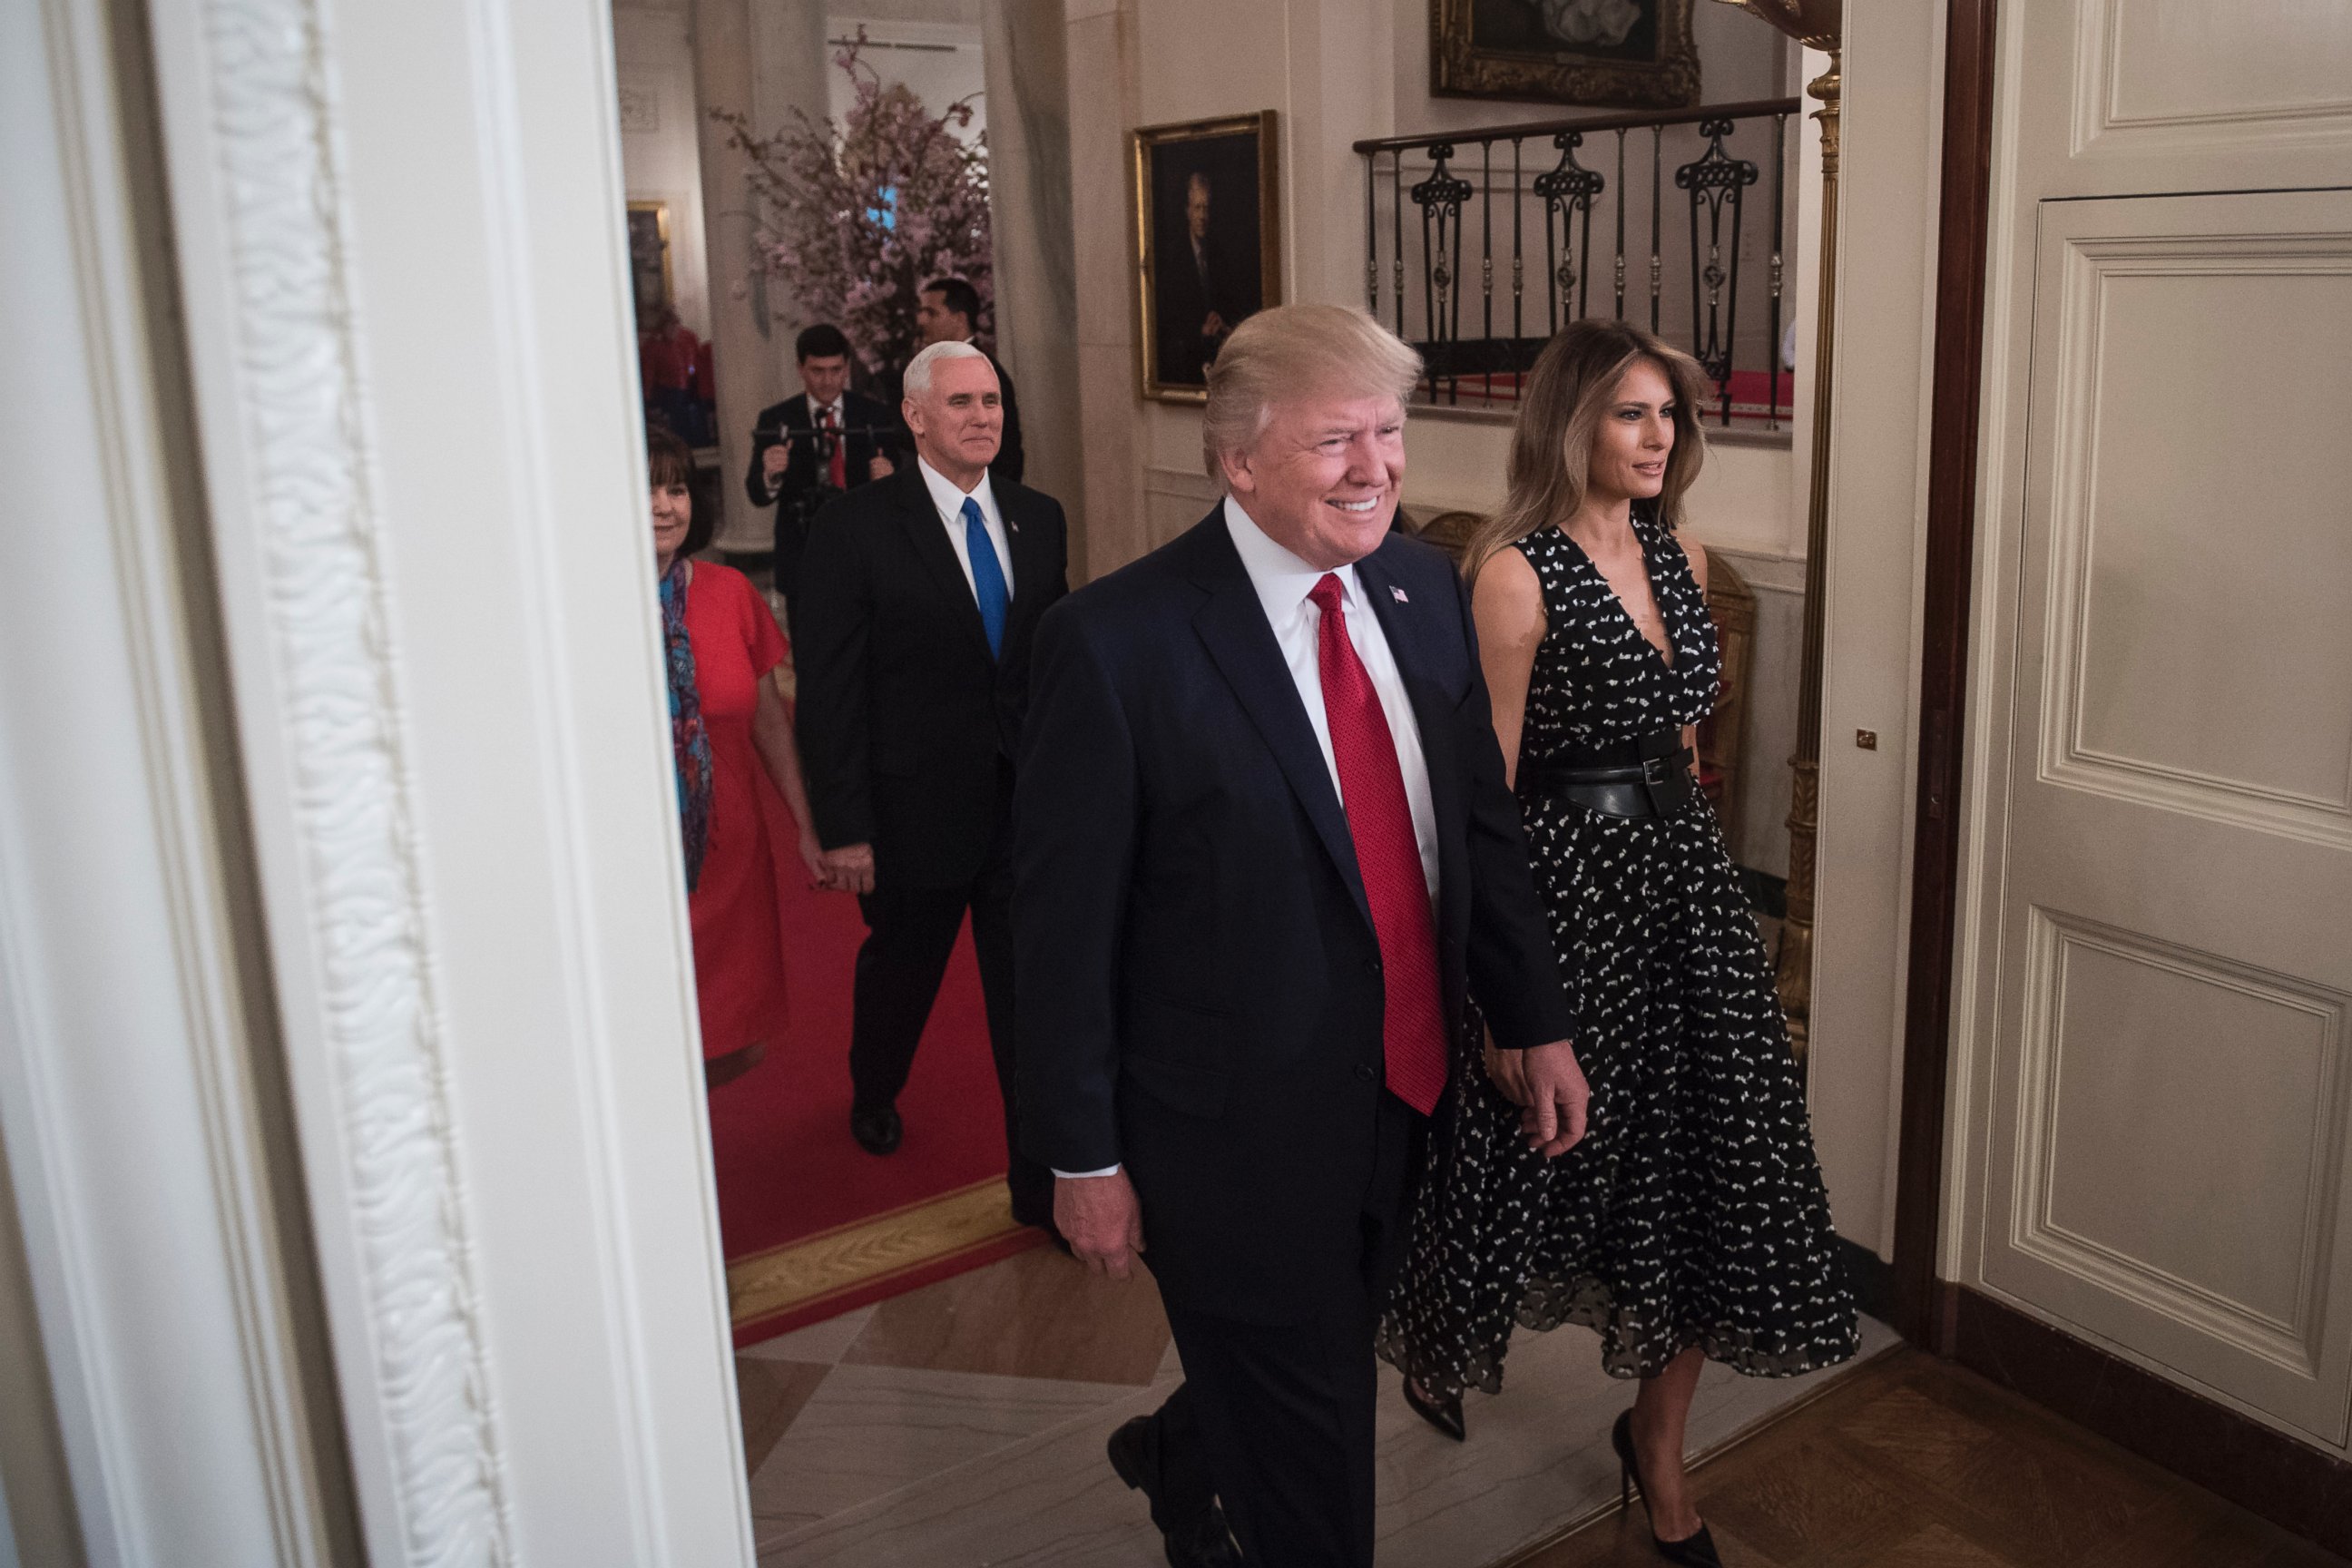 PHOTO: President Donald Trump and first lady Melania Trump followed by Vice President Mike Pence and his wife Karen arrive for a Wounded Warrior Project Soldier Ride event in the East Room of the White House, April 6, 2017. 